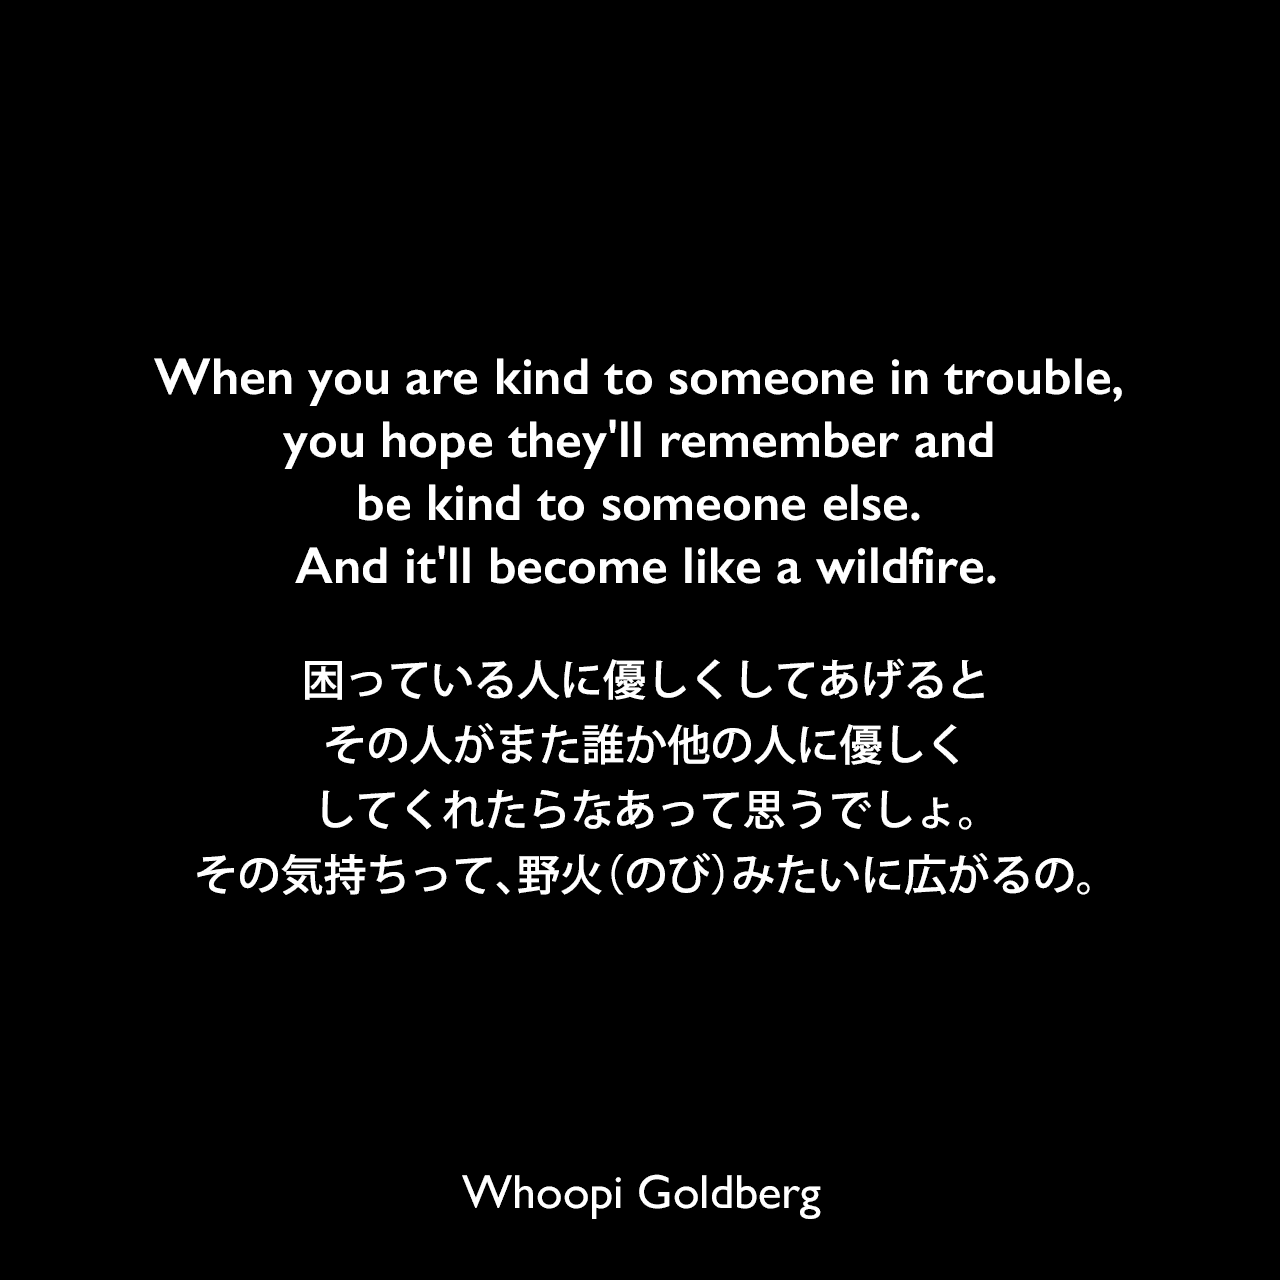 When you are kind to someone in trouble, you hope they’ll remember and be kind to someone else. And it’ll become like a wildfire.困っている人に優しくしてあげると、その人がまた誰か他の人に優しくしてくれたらなあって思うでしょ。その気持ちって、野火（のび）みたいに広がるの。